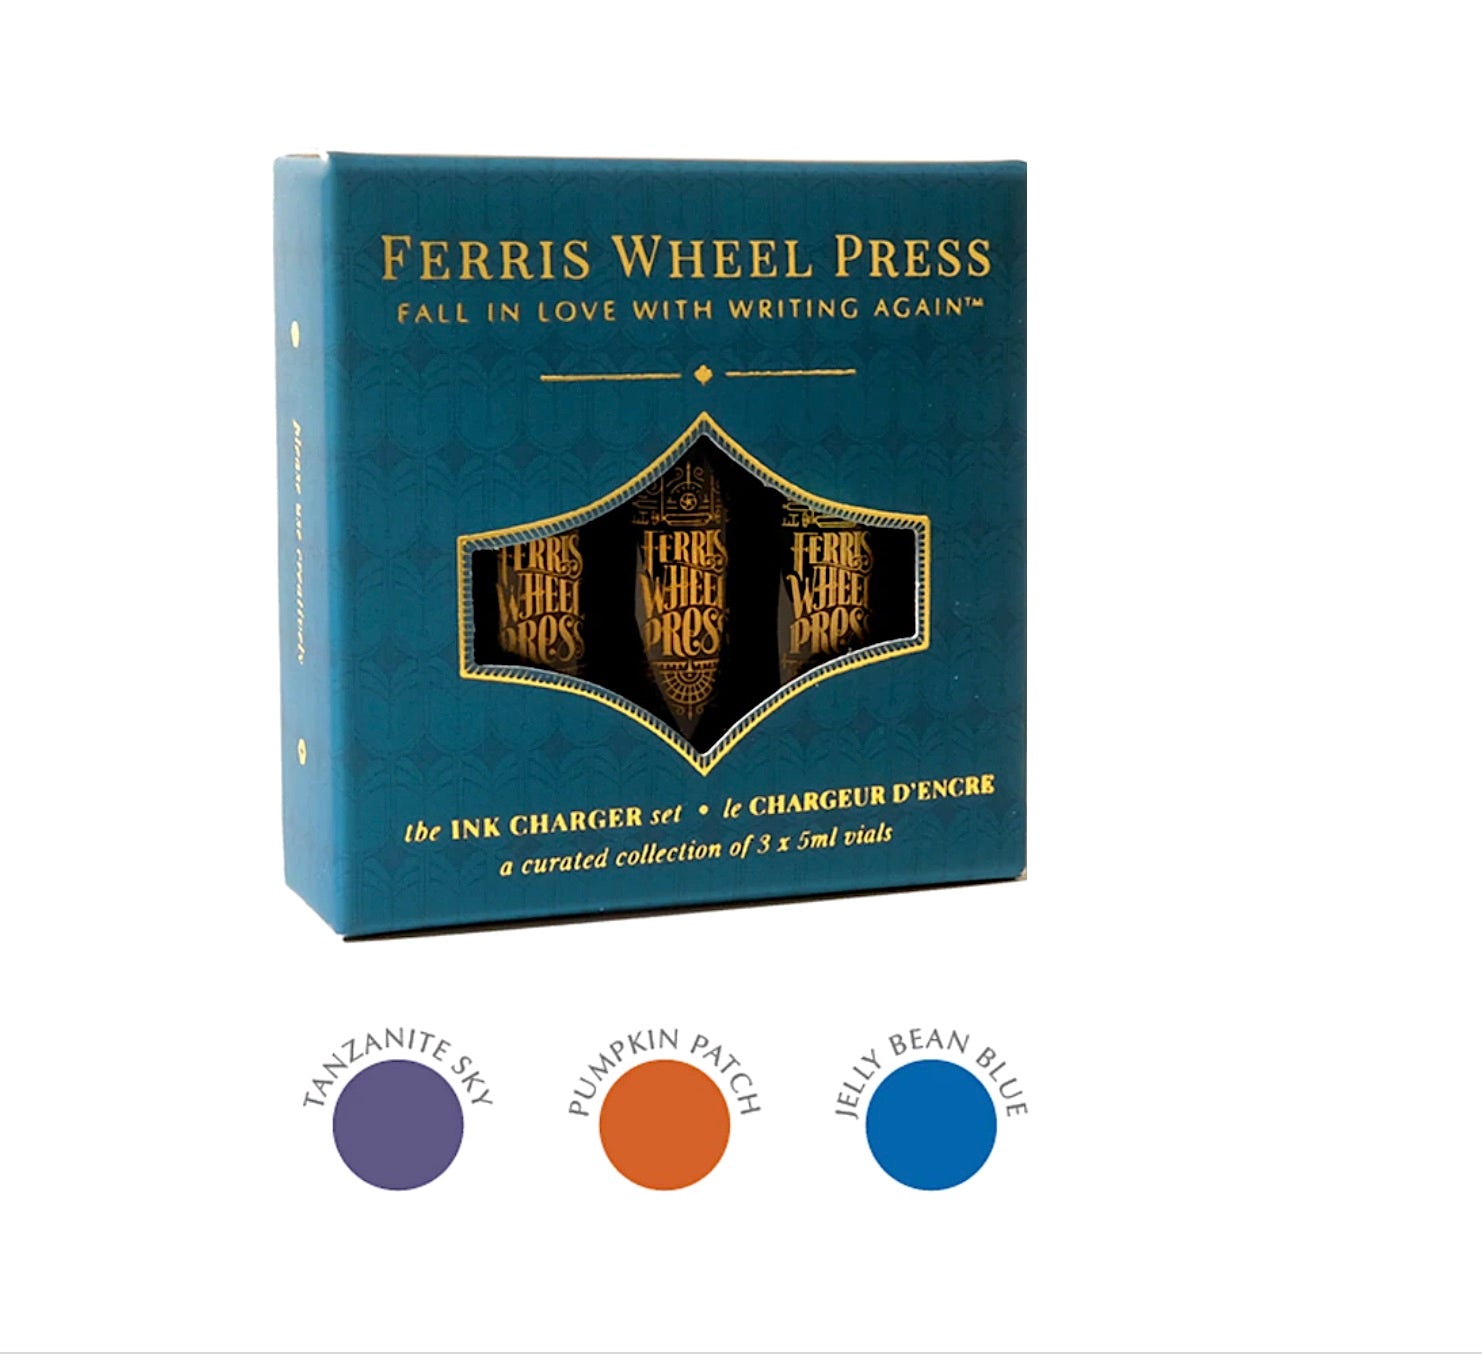 Ferris Wheel Press Ink Charger Set - The Harvest Collection